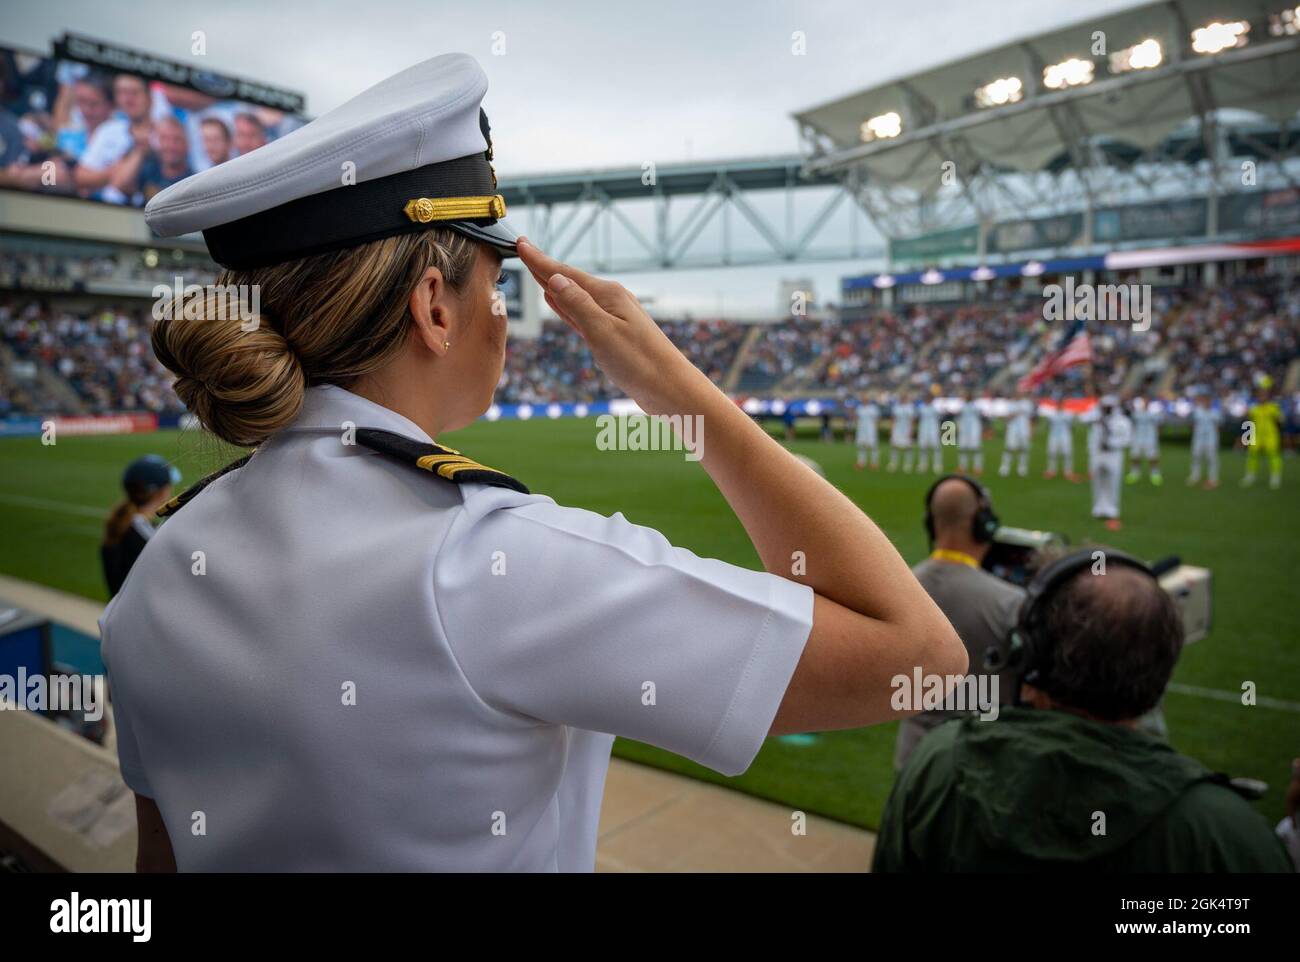 210801-N-WF272-1255 CHESTER, Pa. (Aug. 1, 2021) Lt. Taylor VanderWoude,  from Boston, a medical officer programs recruiter at Navy Talent  Acquisition Group Philadelphia, salutes during the national anthem at a  Philadelphia Union's soccer